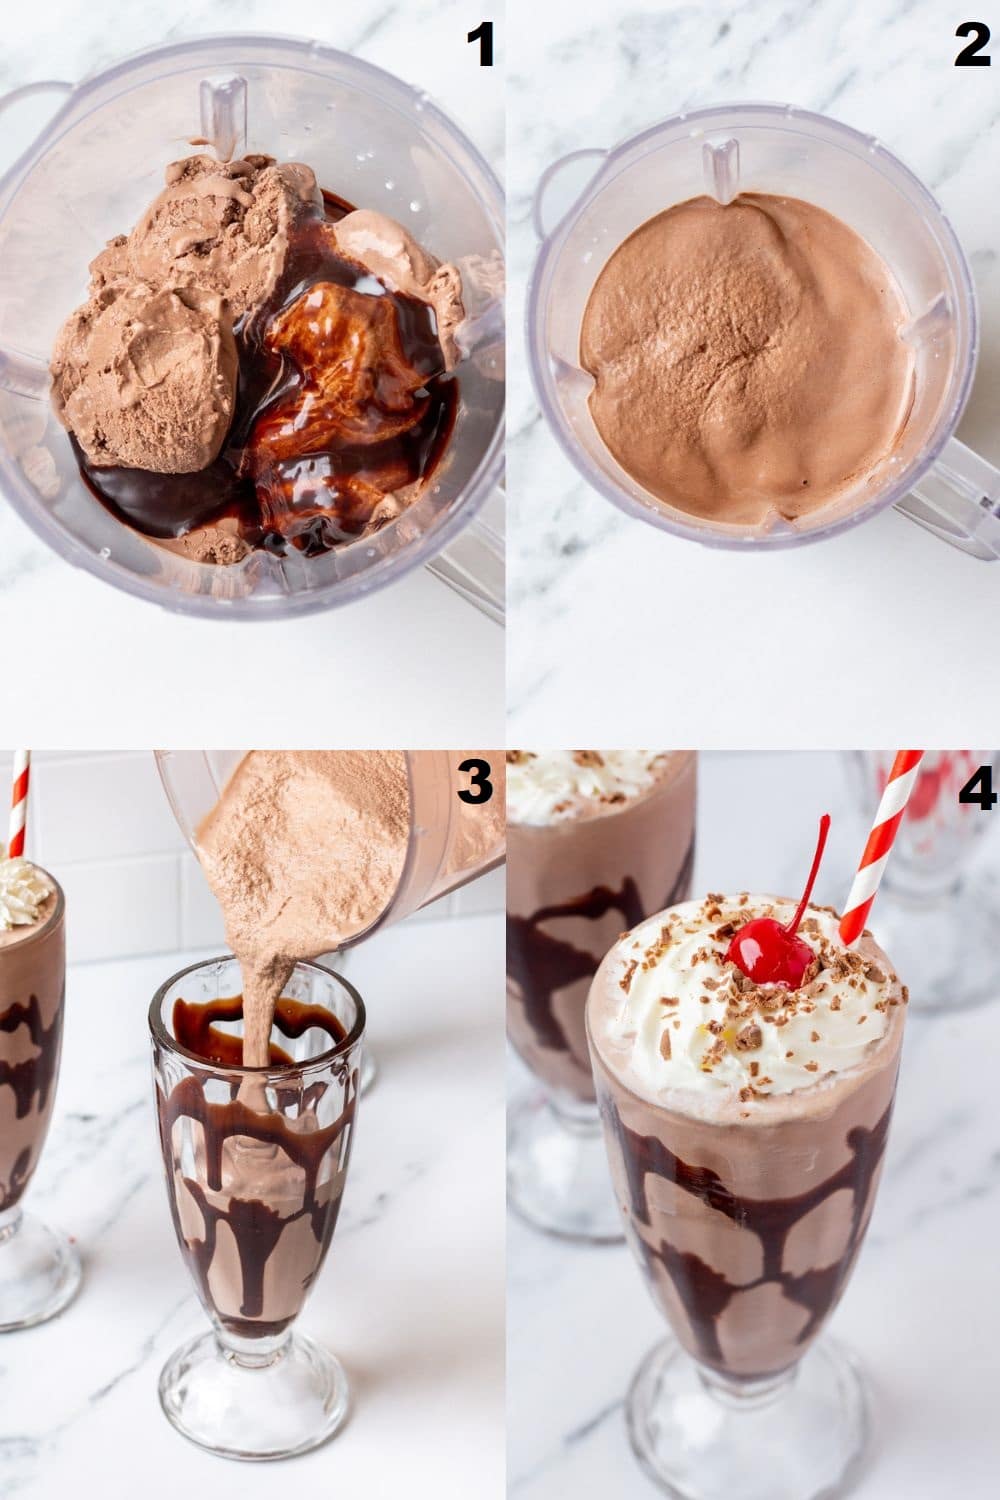 a collage of four images showing how to make a hershey's milkshake with chocolate ice cream in a blender.